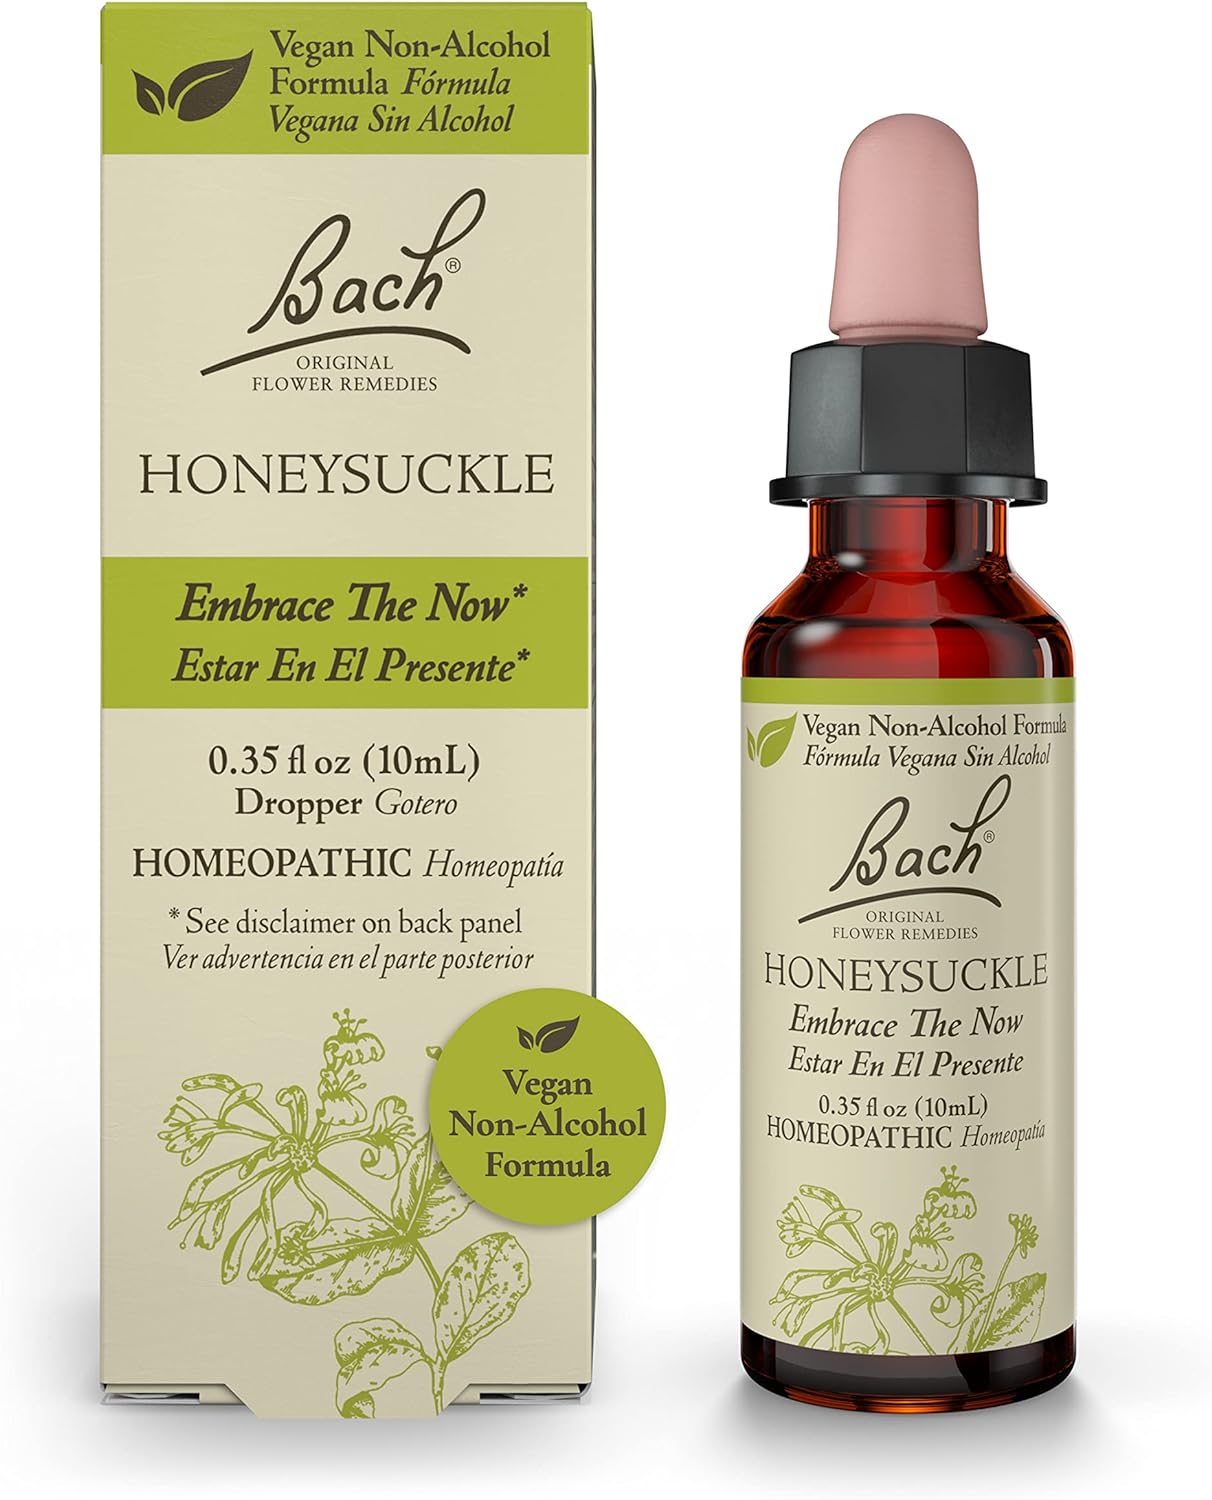 Bach Original Flower Remedies, Honeysuckle for Embracing The Now (Non-Alcohol Formula), Natural Homeopathic Flower Essence, Holistic Wellness and Stress Relief, Vegan, 10mL Dropper